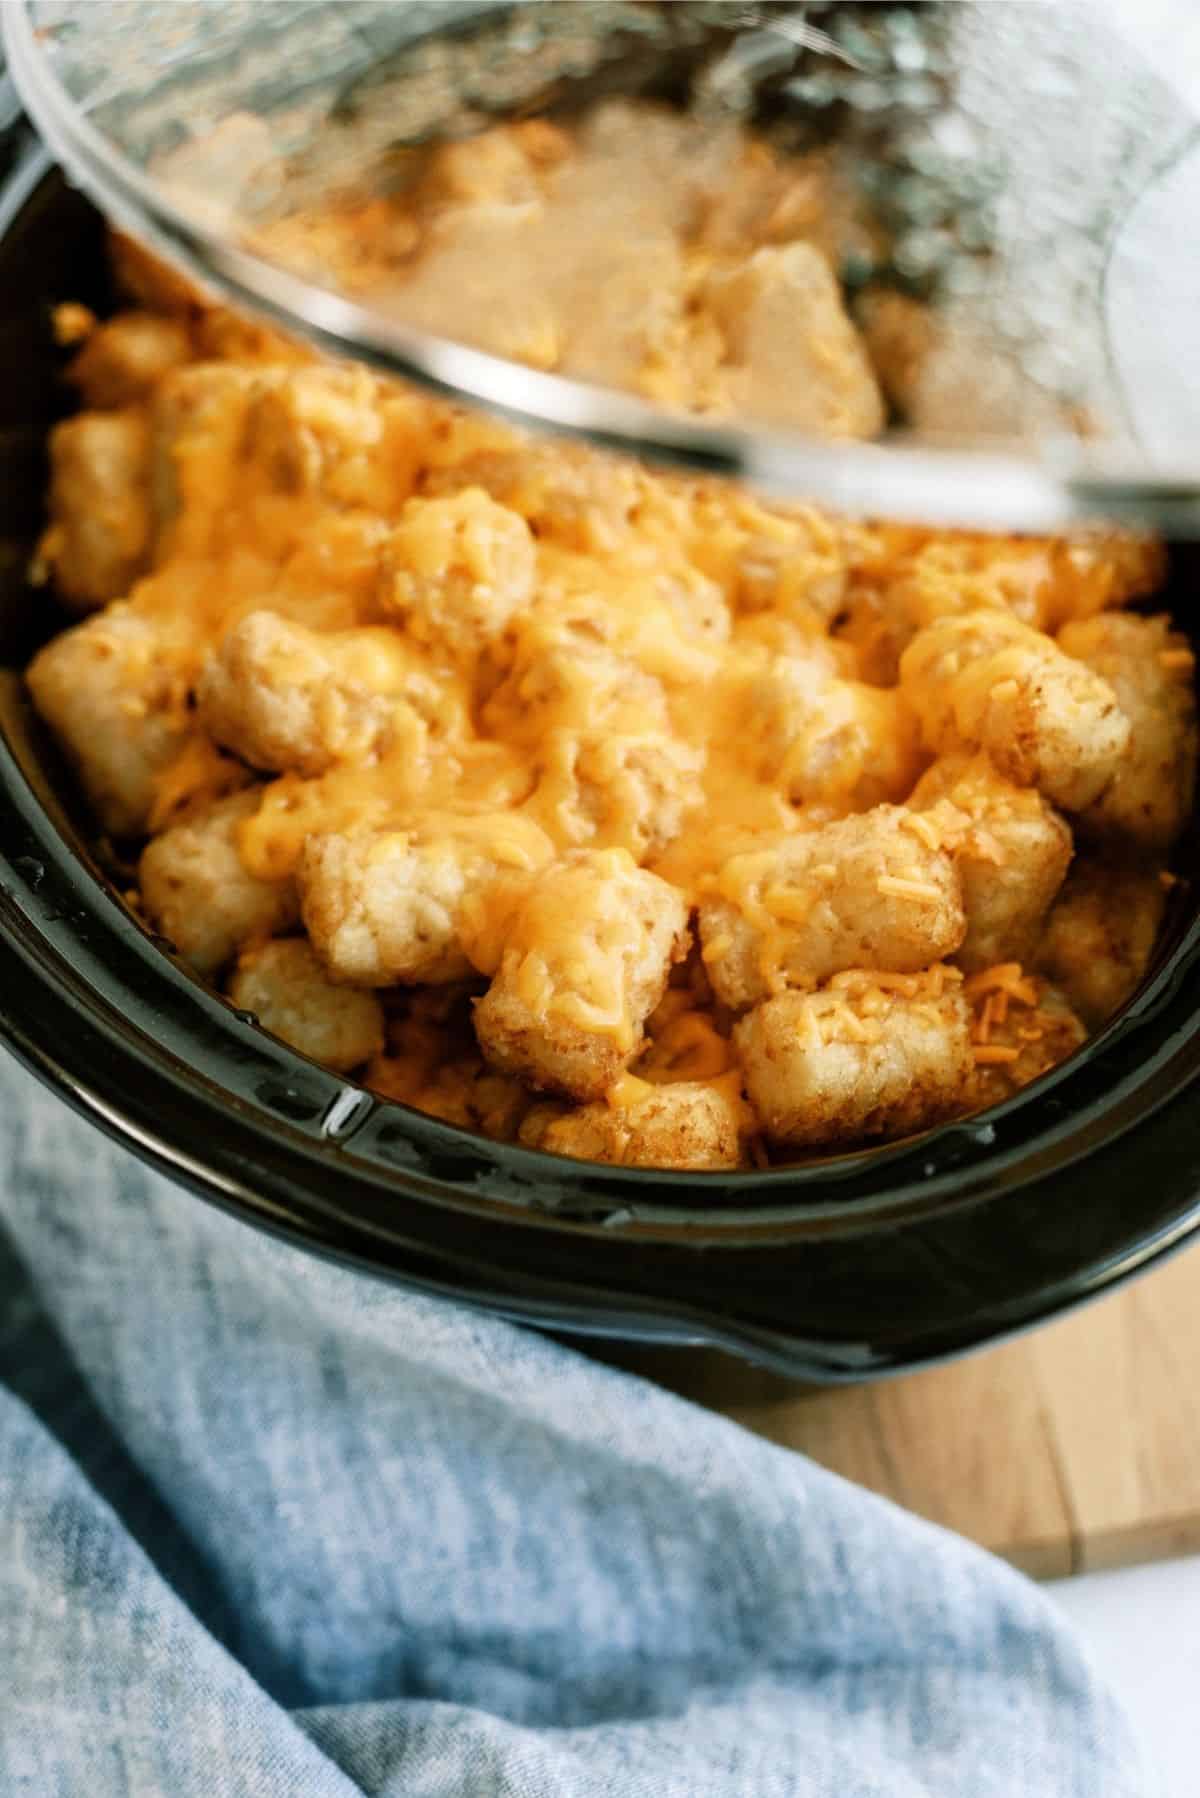 Slow Cooker Tater Tot Casserole - Damn Delicious